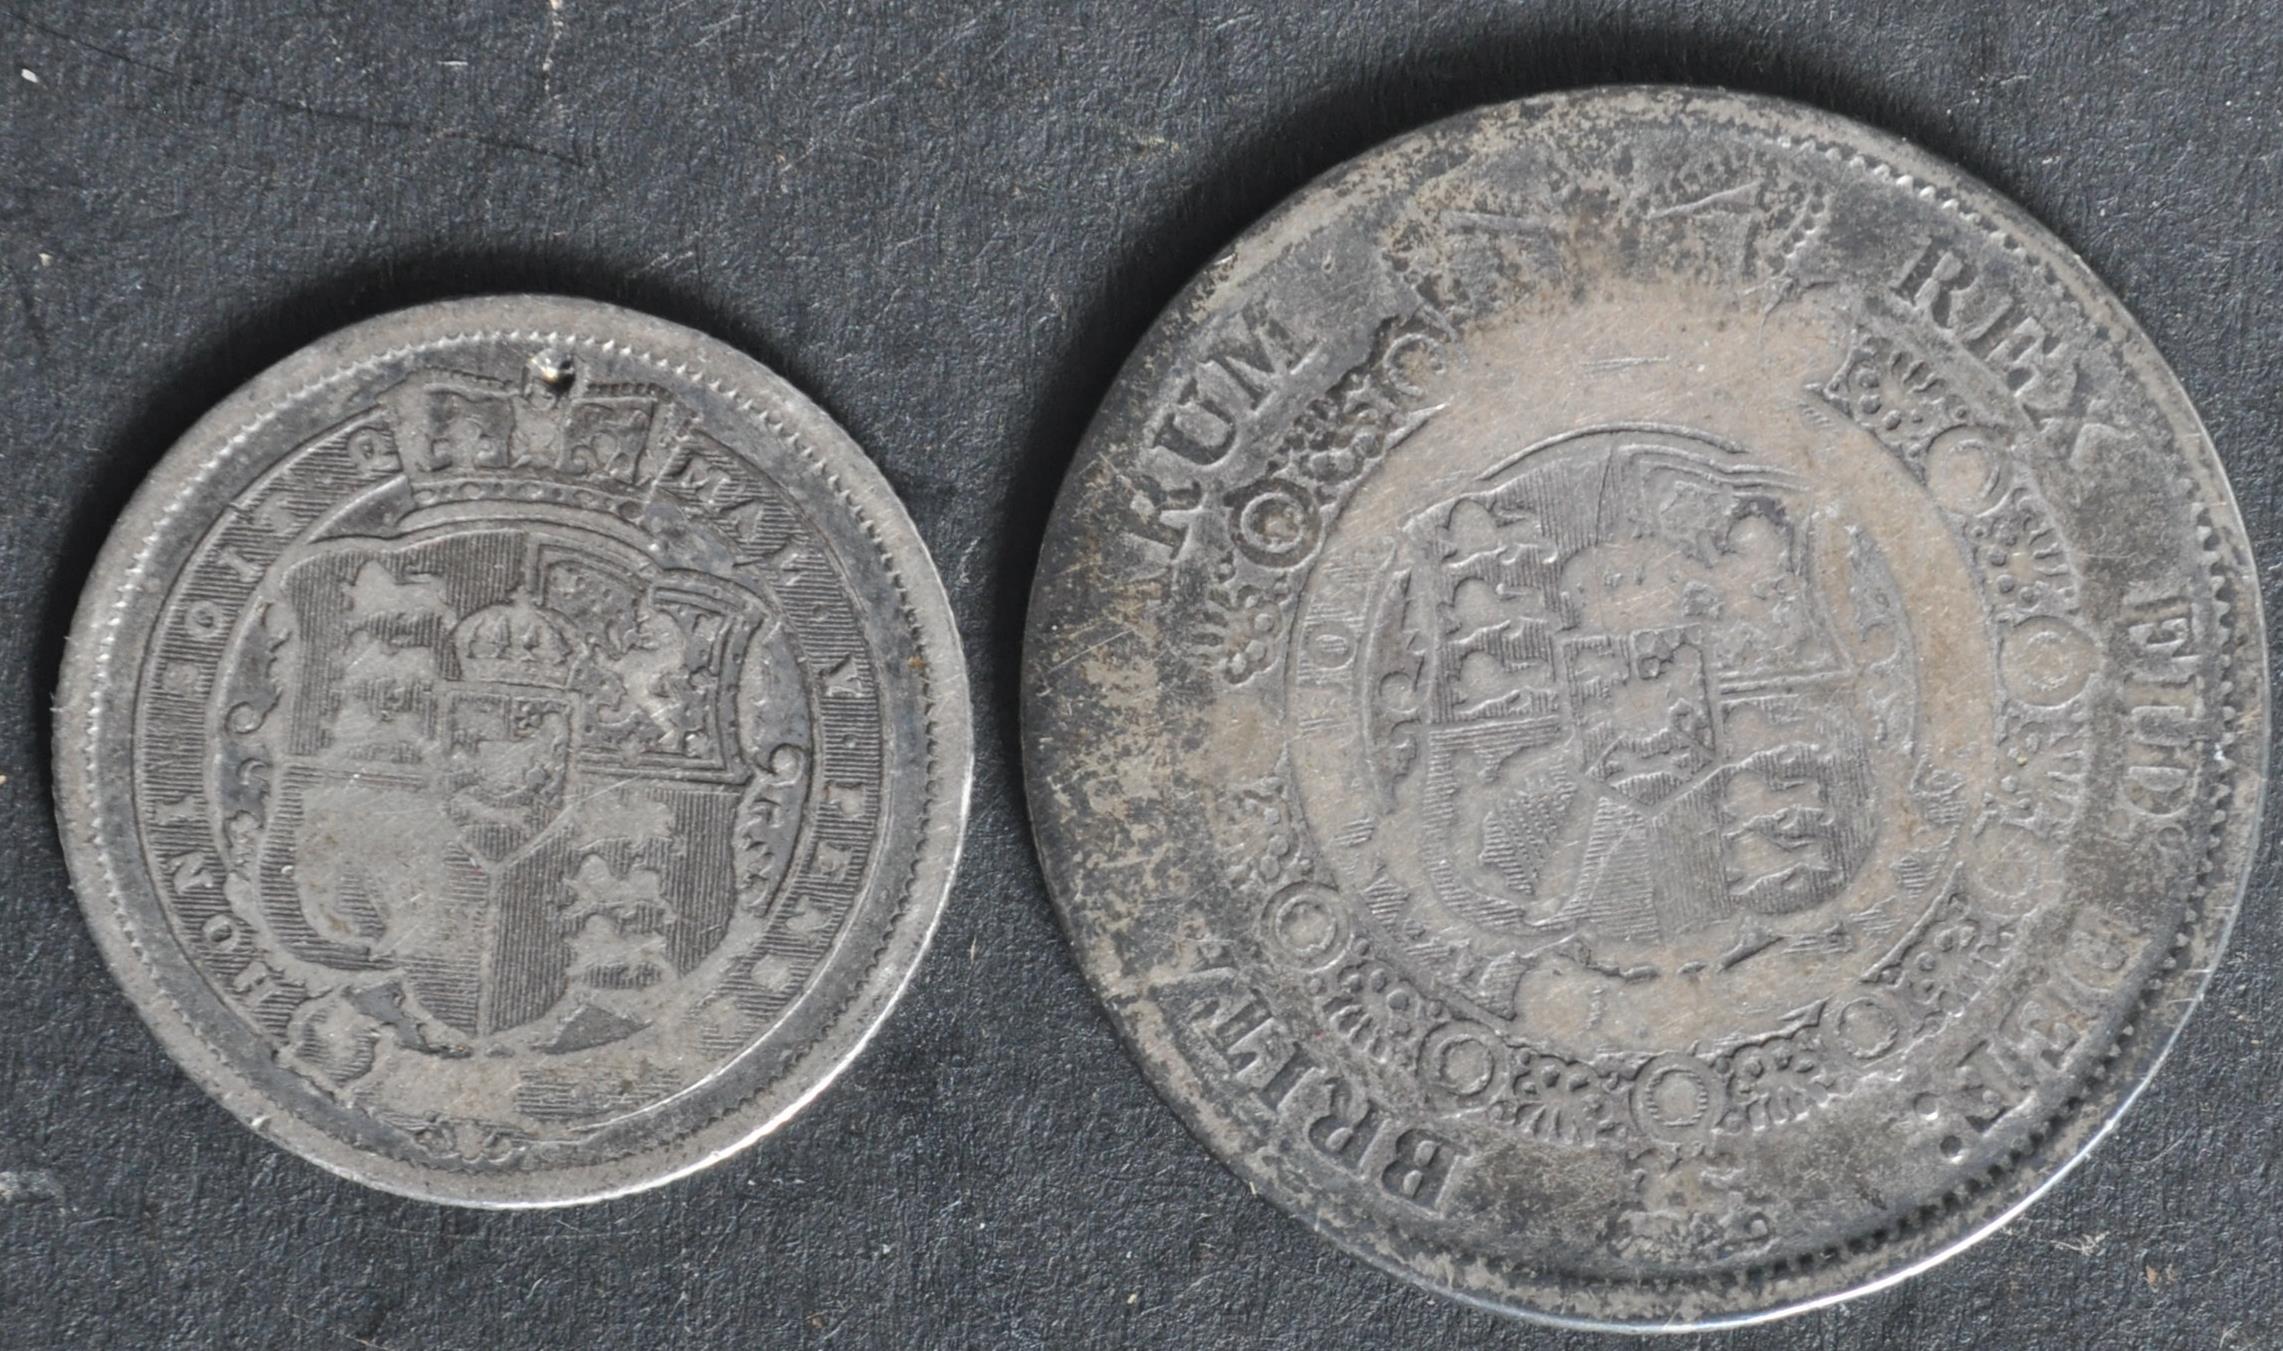 TWO GEORGE III SILVER COINS COMPRISING A HALF CROWN & SHILLING - Image 2 of 2